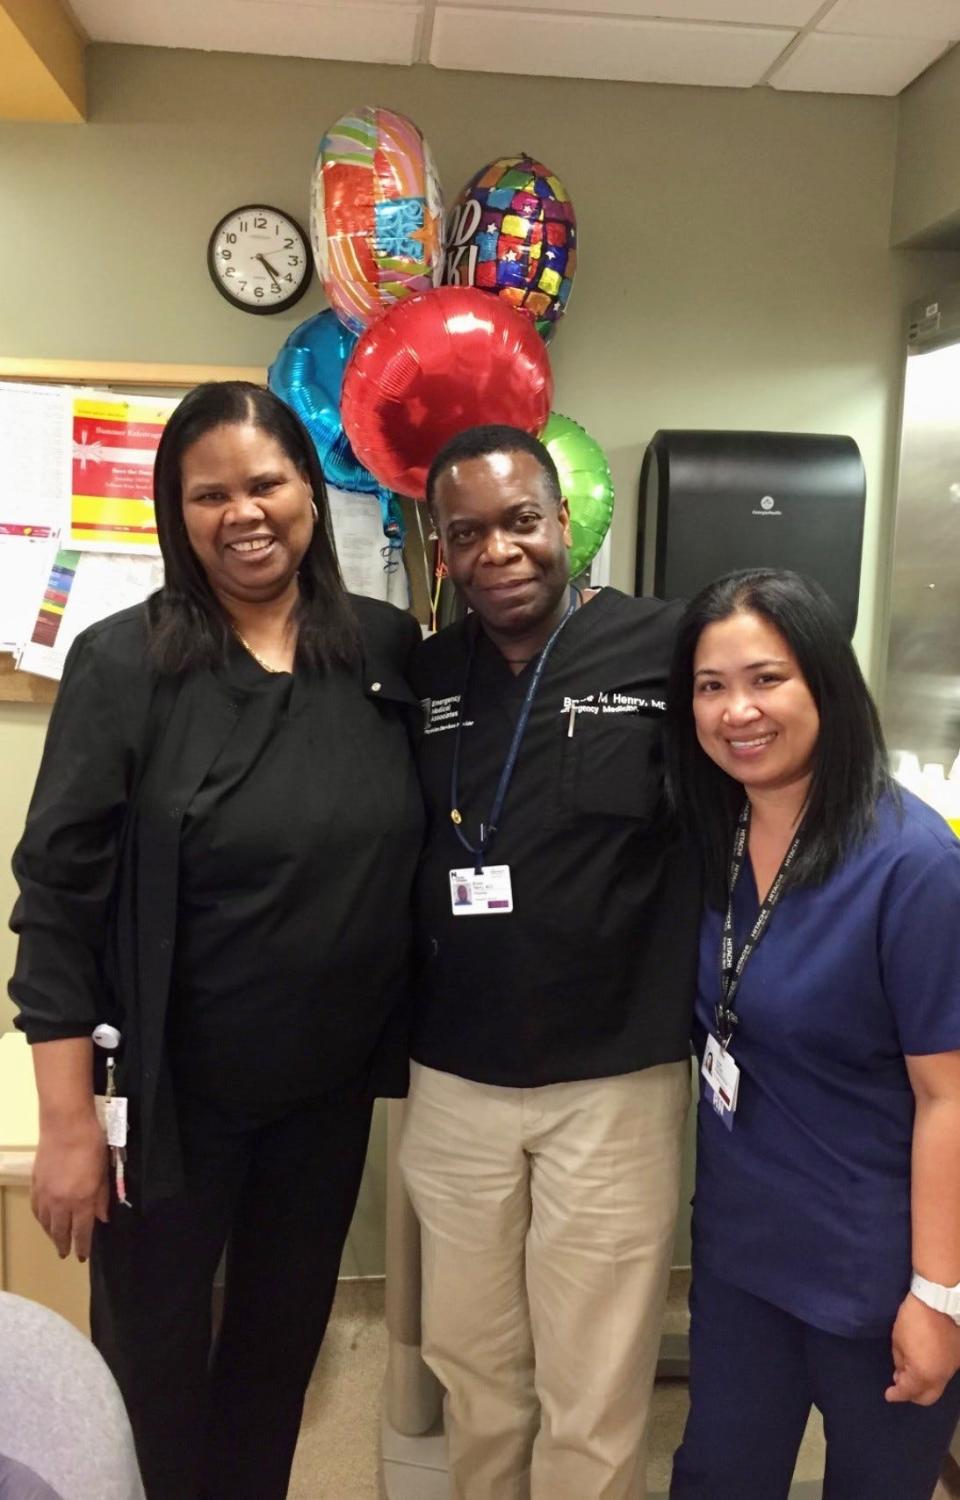 Dr. Bruce Maurice Henry, center, with nurses Claudia Charles, left, and Sarah Samala, right, at Montefiore Nyack Hospital in 2022.